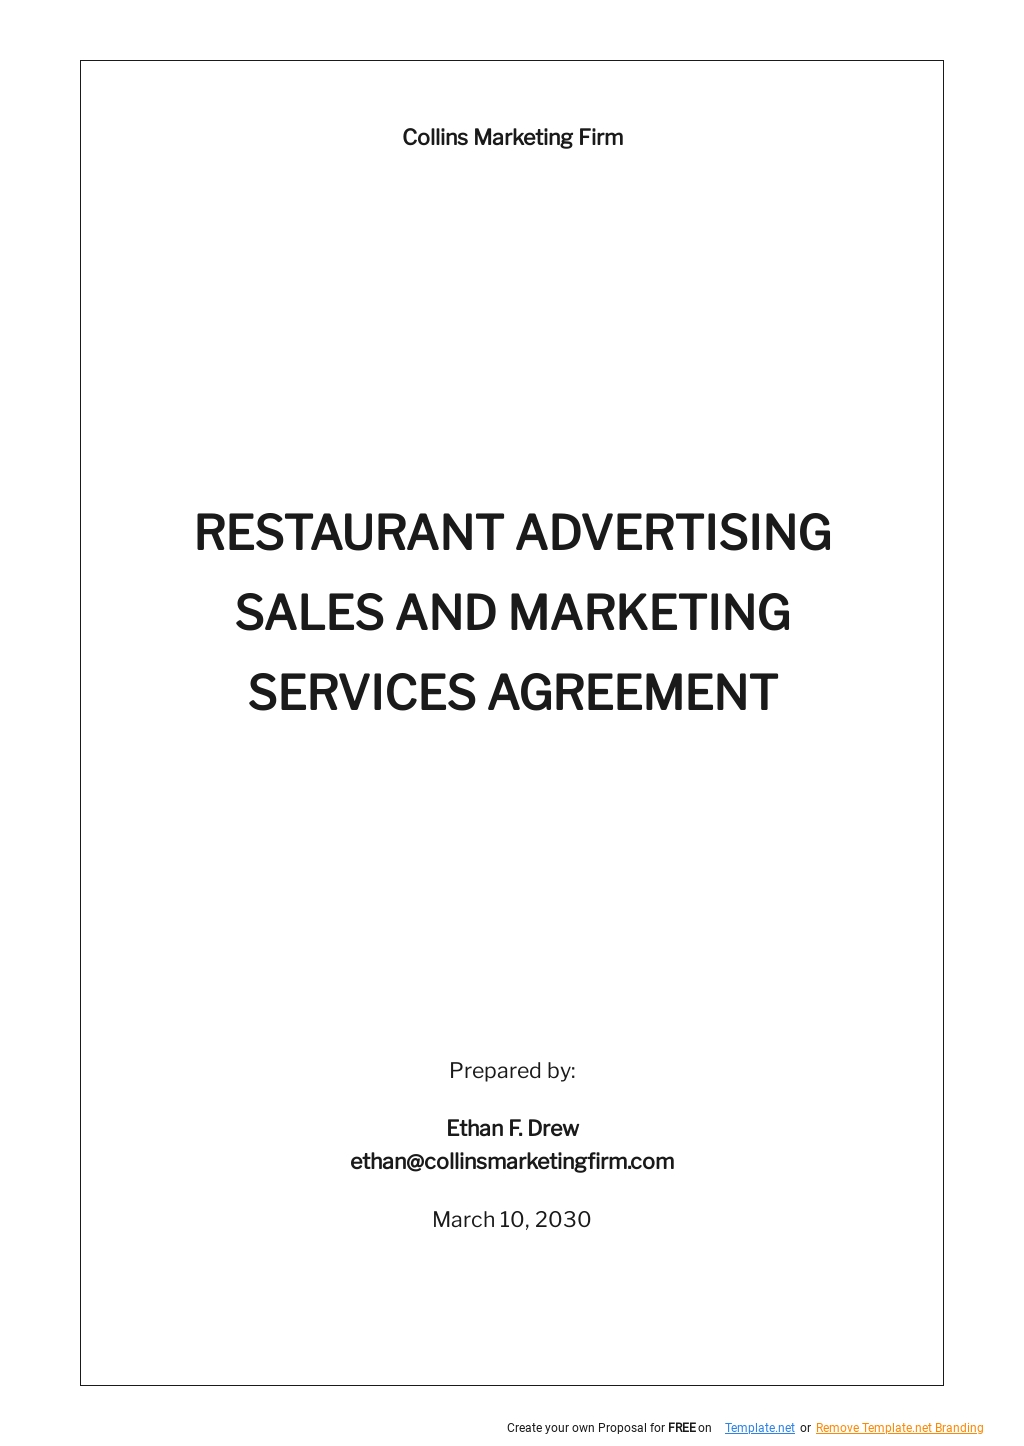 Restaurant Advertising Sales and Marketing Services Agreement Template - Google Docs, Word, Apple Pages